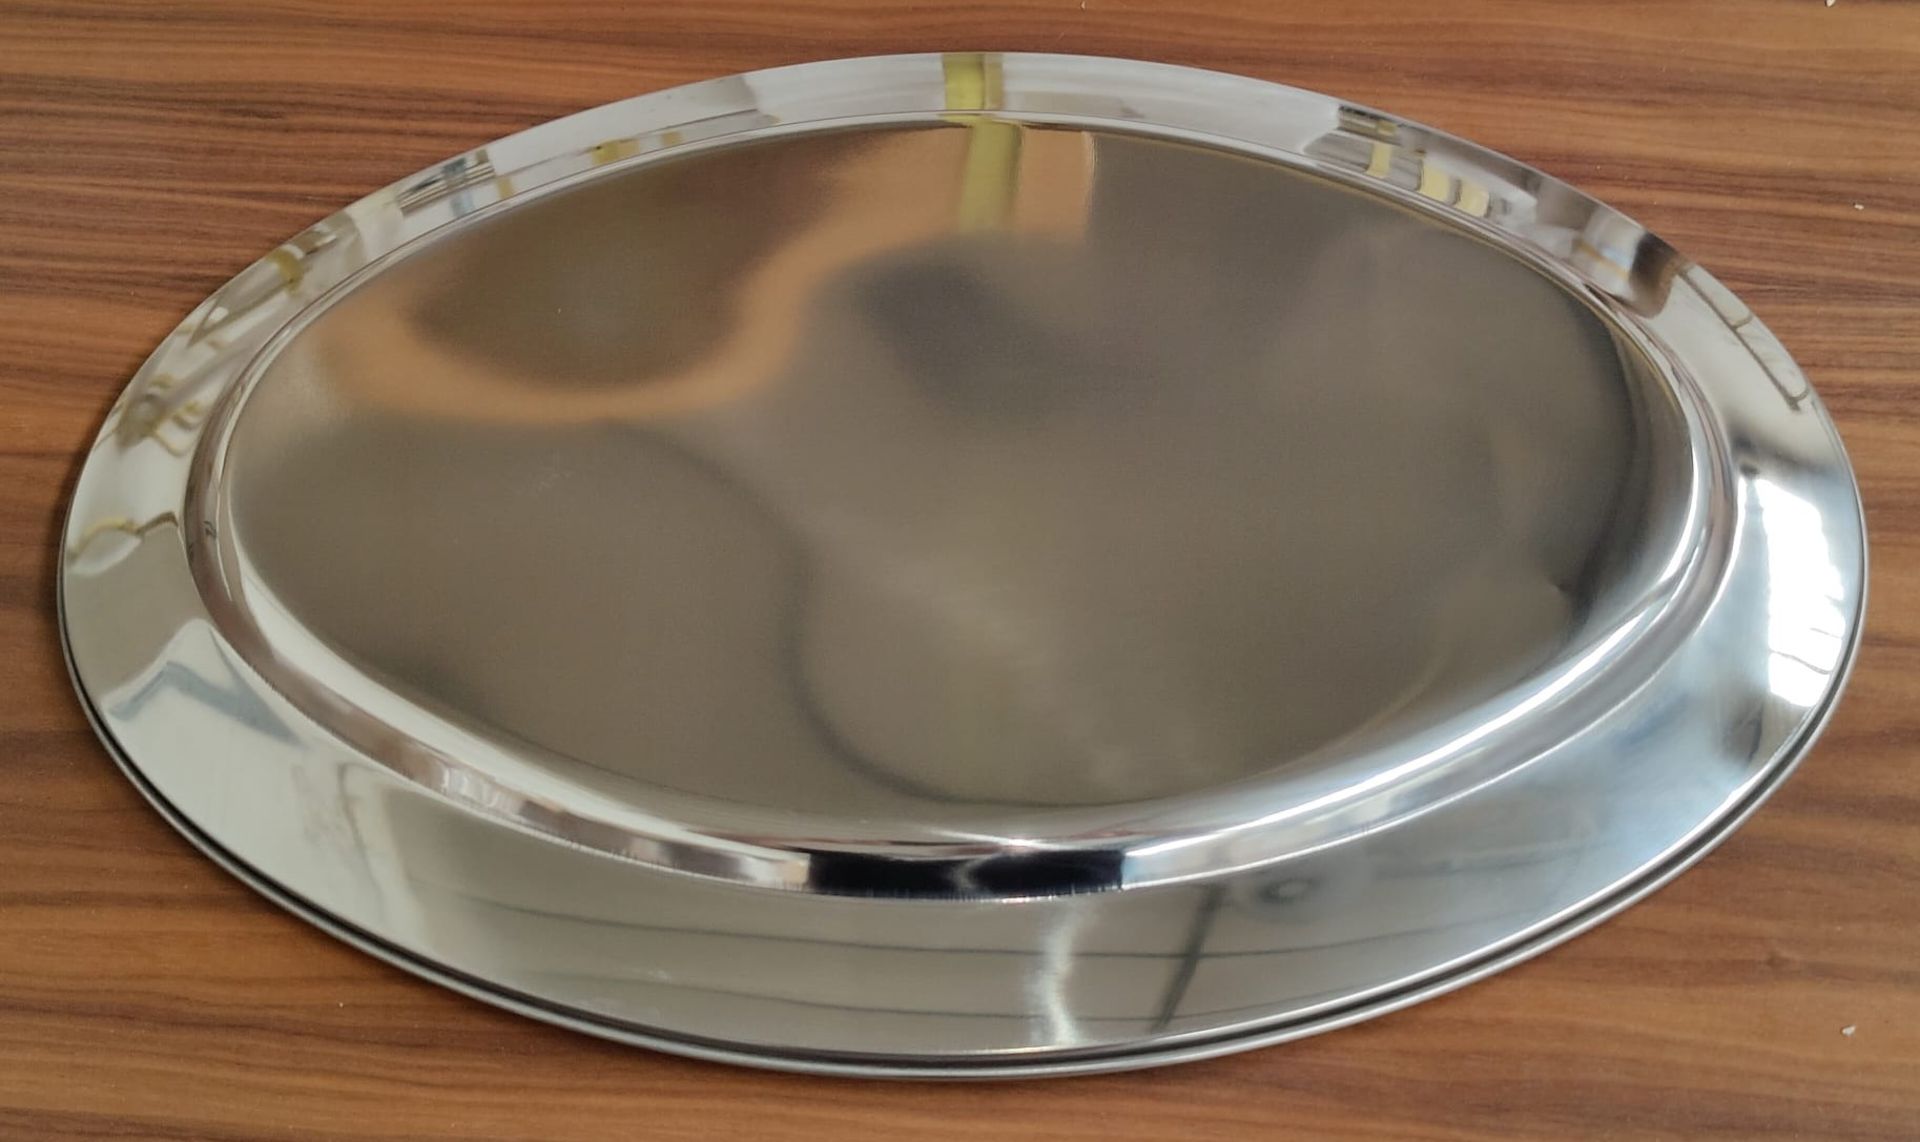 20 x Stainless Steel Oval Service Trays - Size: 450mm x 310mm - Brand New Boxed Stock - RRP £200 - Image 8 of 8